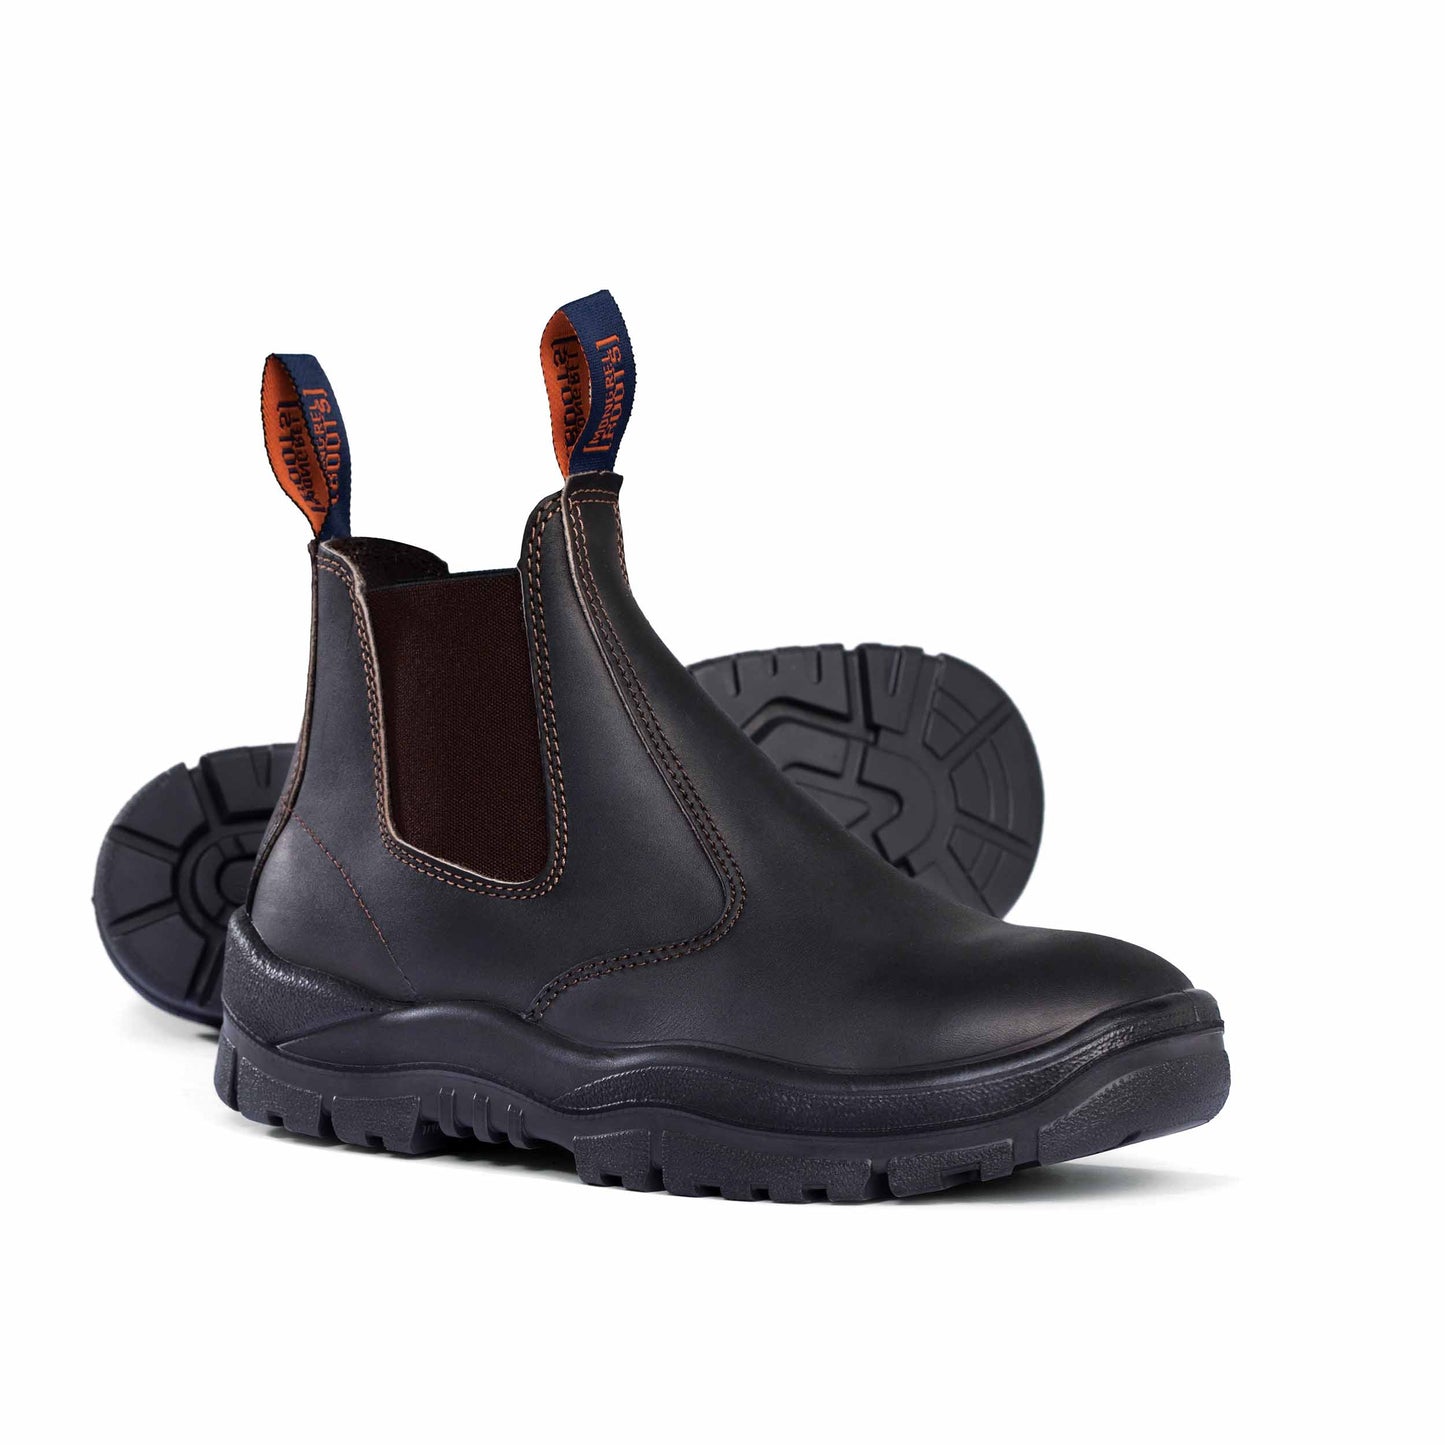 MONGREL 240030 SAFETY BOOTS - SLIP ON